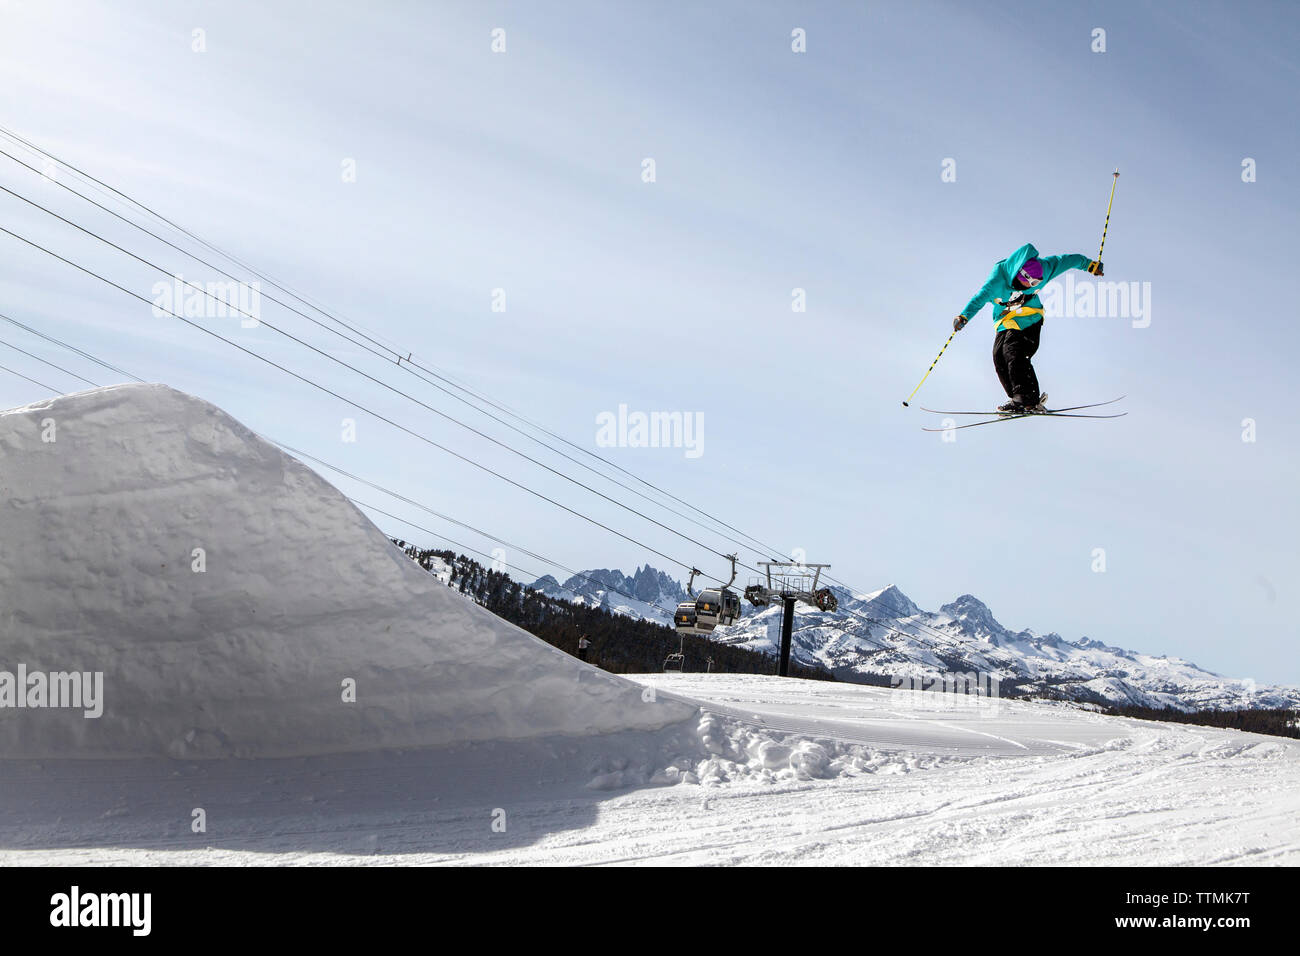 USA, California, Mammoth, a snowboarder catches air off a jump at Mammoth Ski Resort Stock Photo